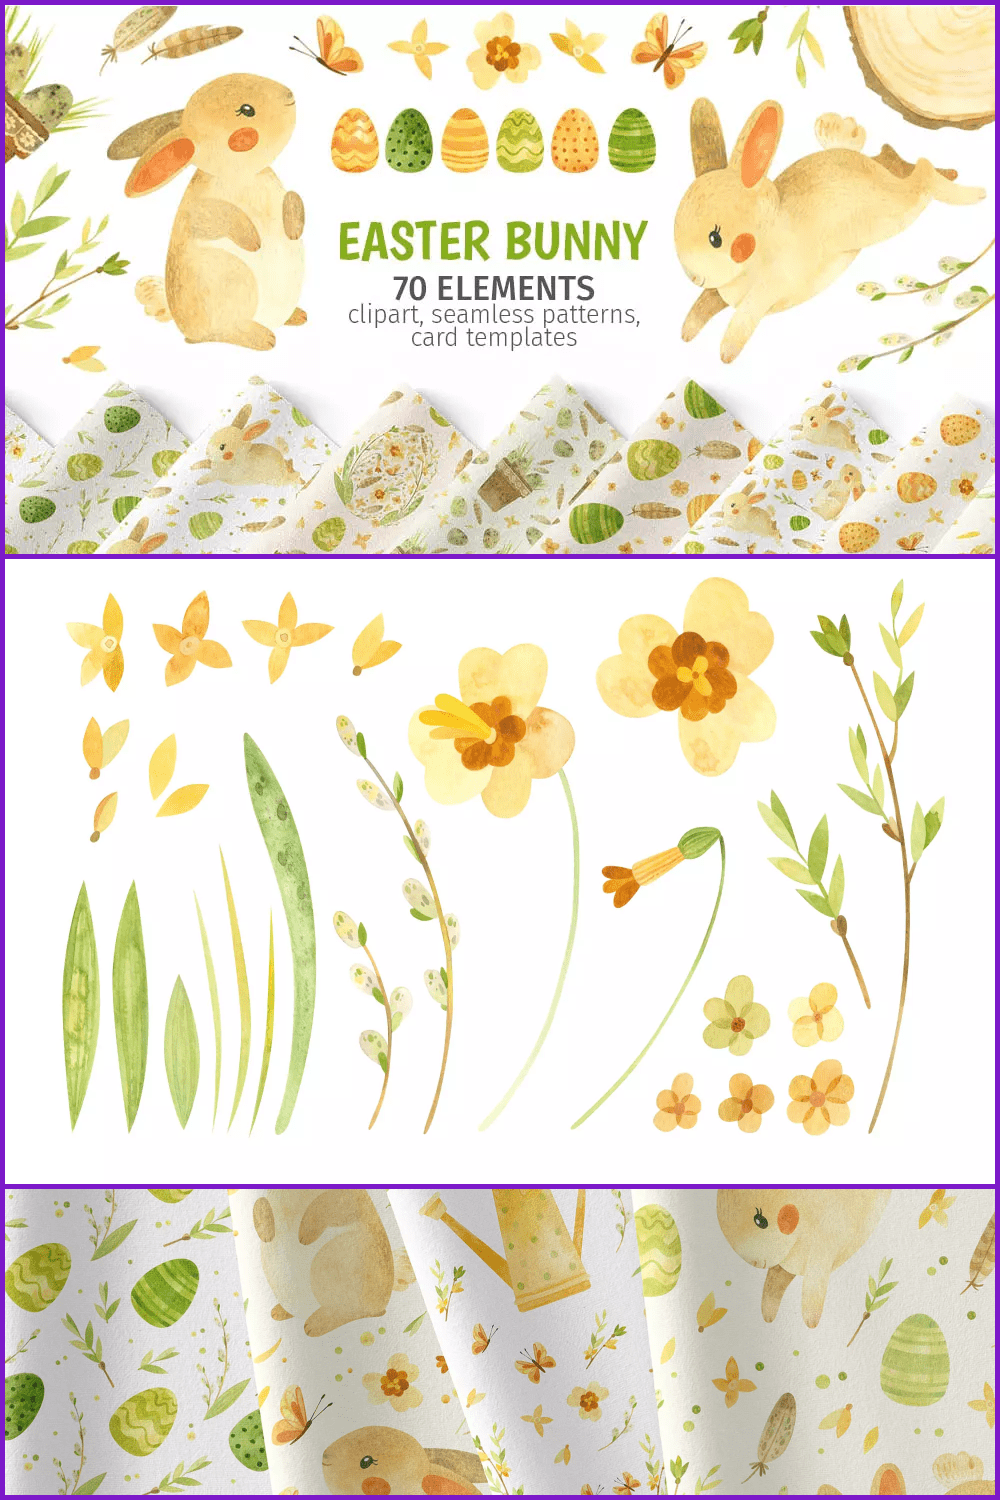 Rustic Easter Watercolor Clipart & Patterns: 70 Elements.